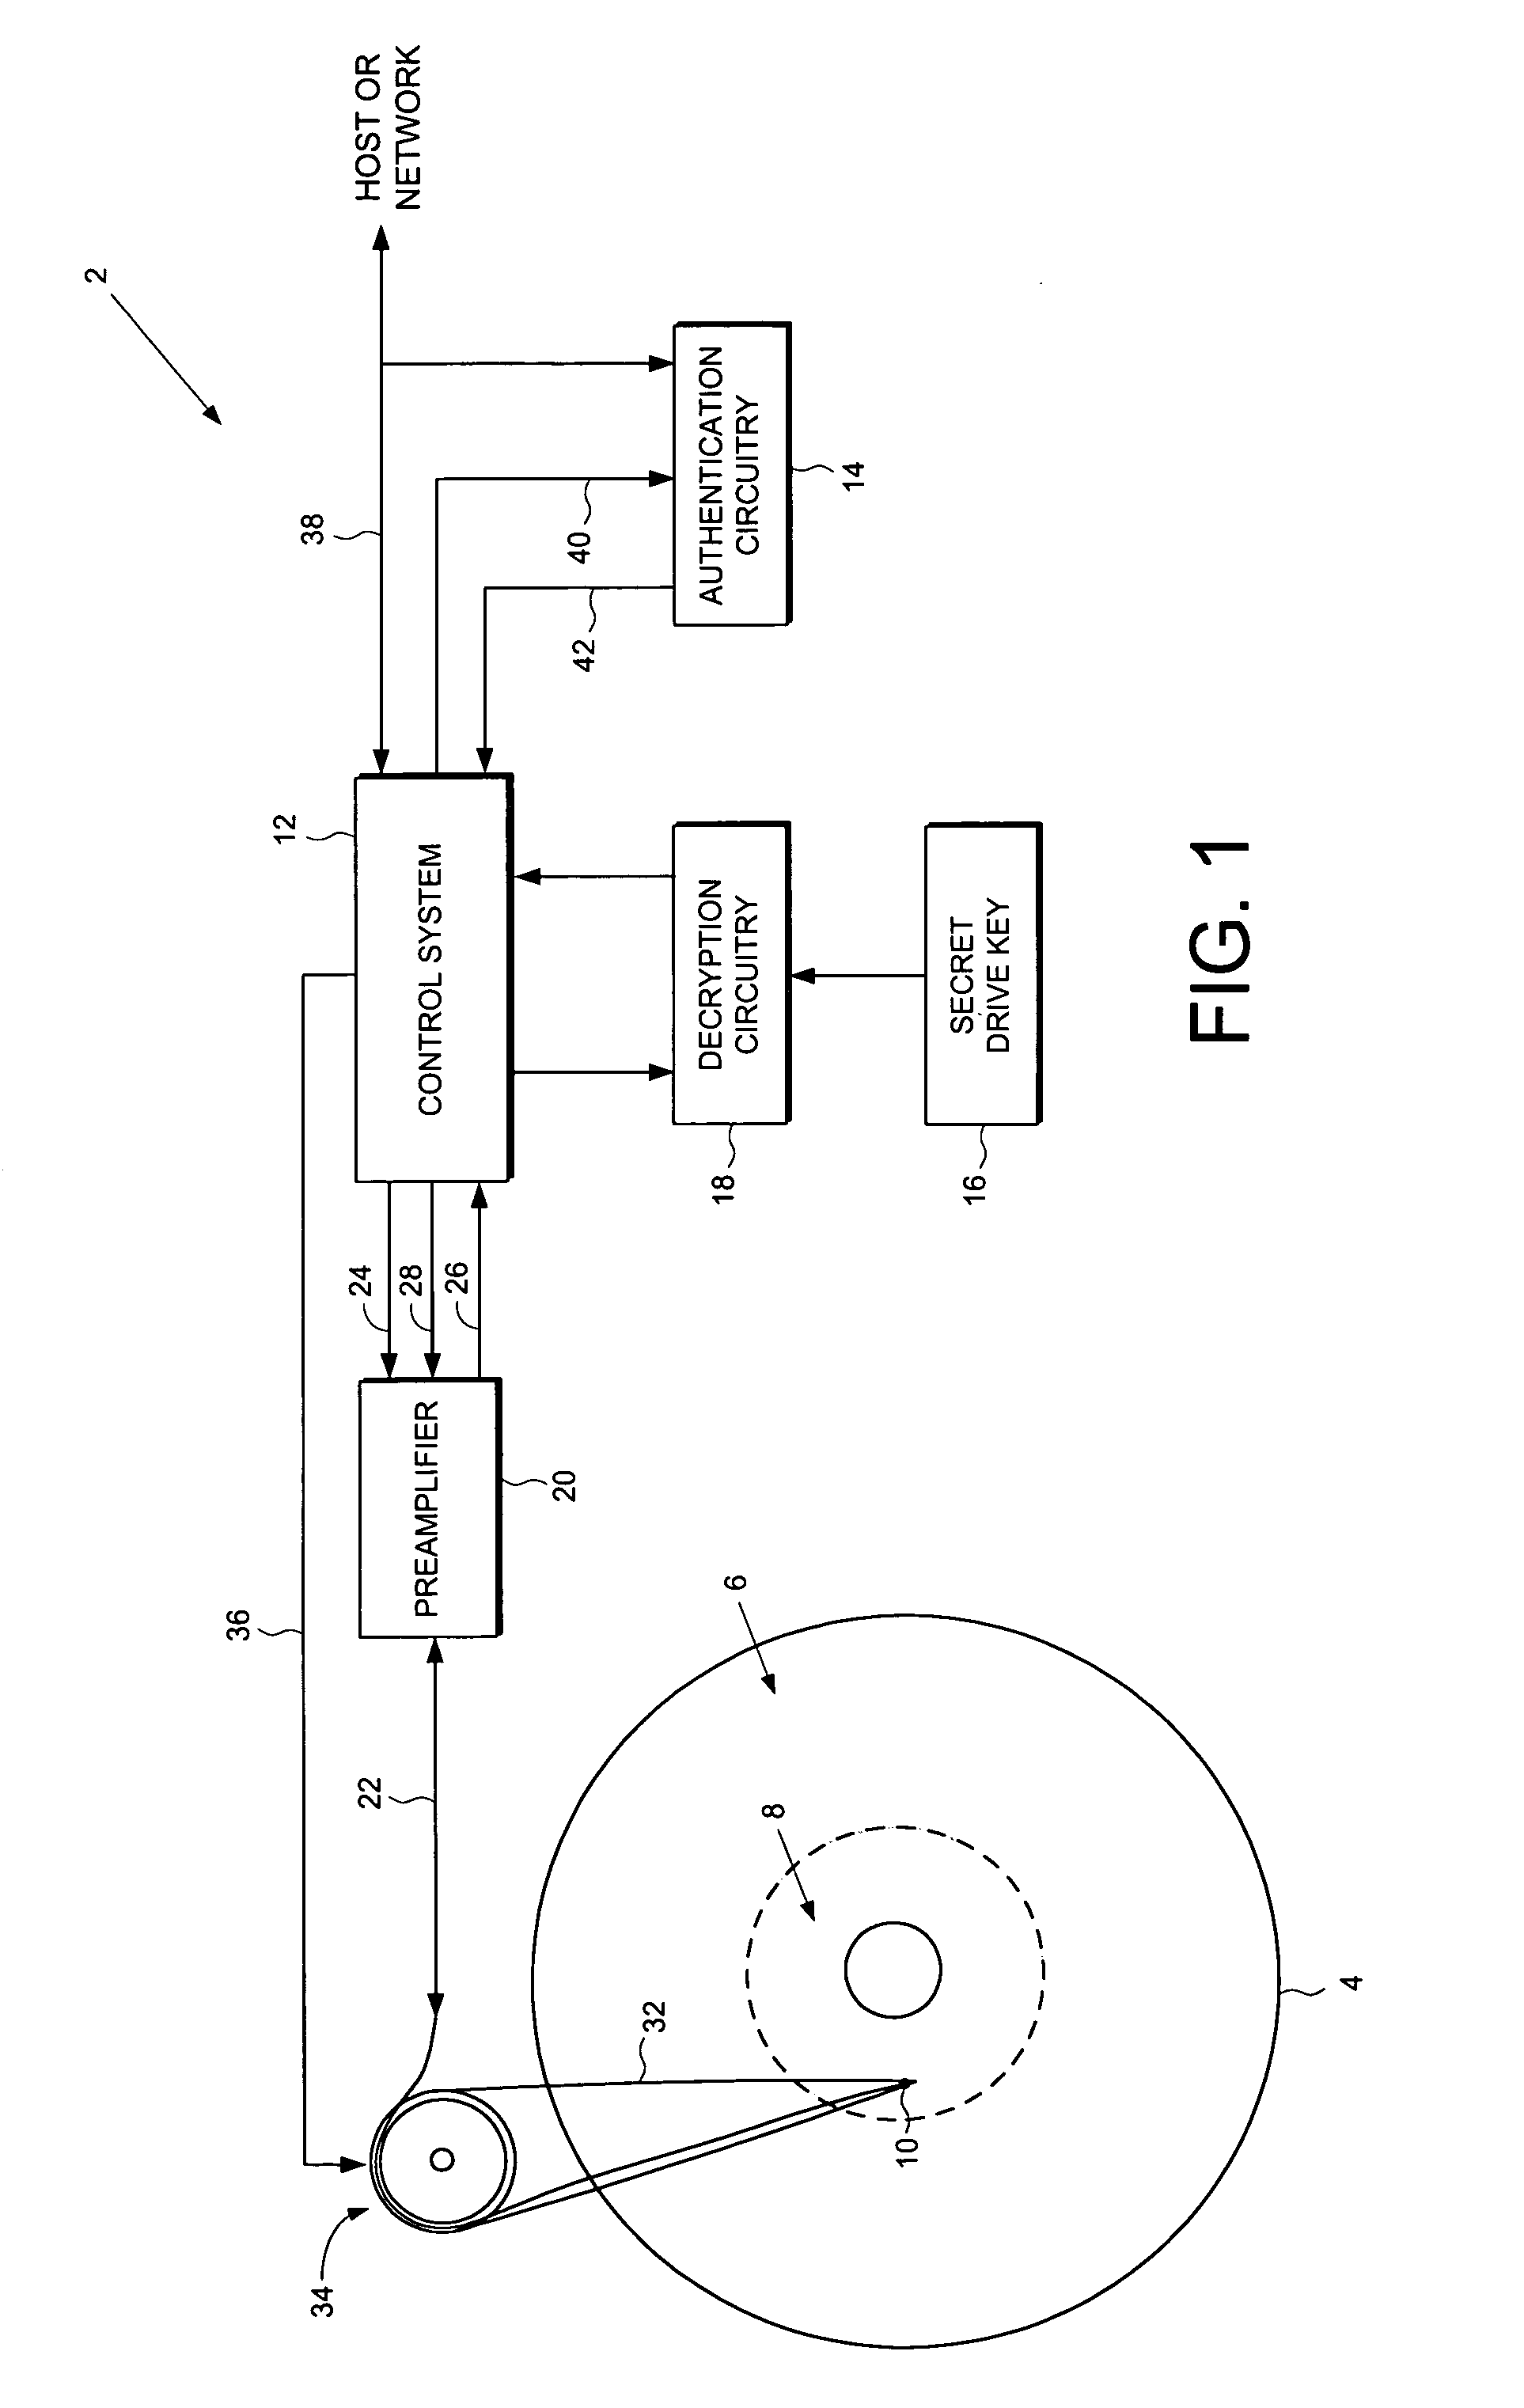 Disk drive employing a disk with a pristine area for storing encrypted data accessible only by trusted devices or clients to facilitate secure network communications